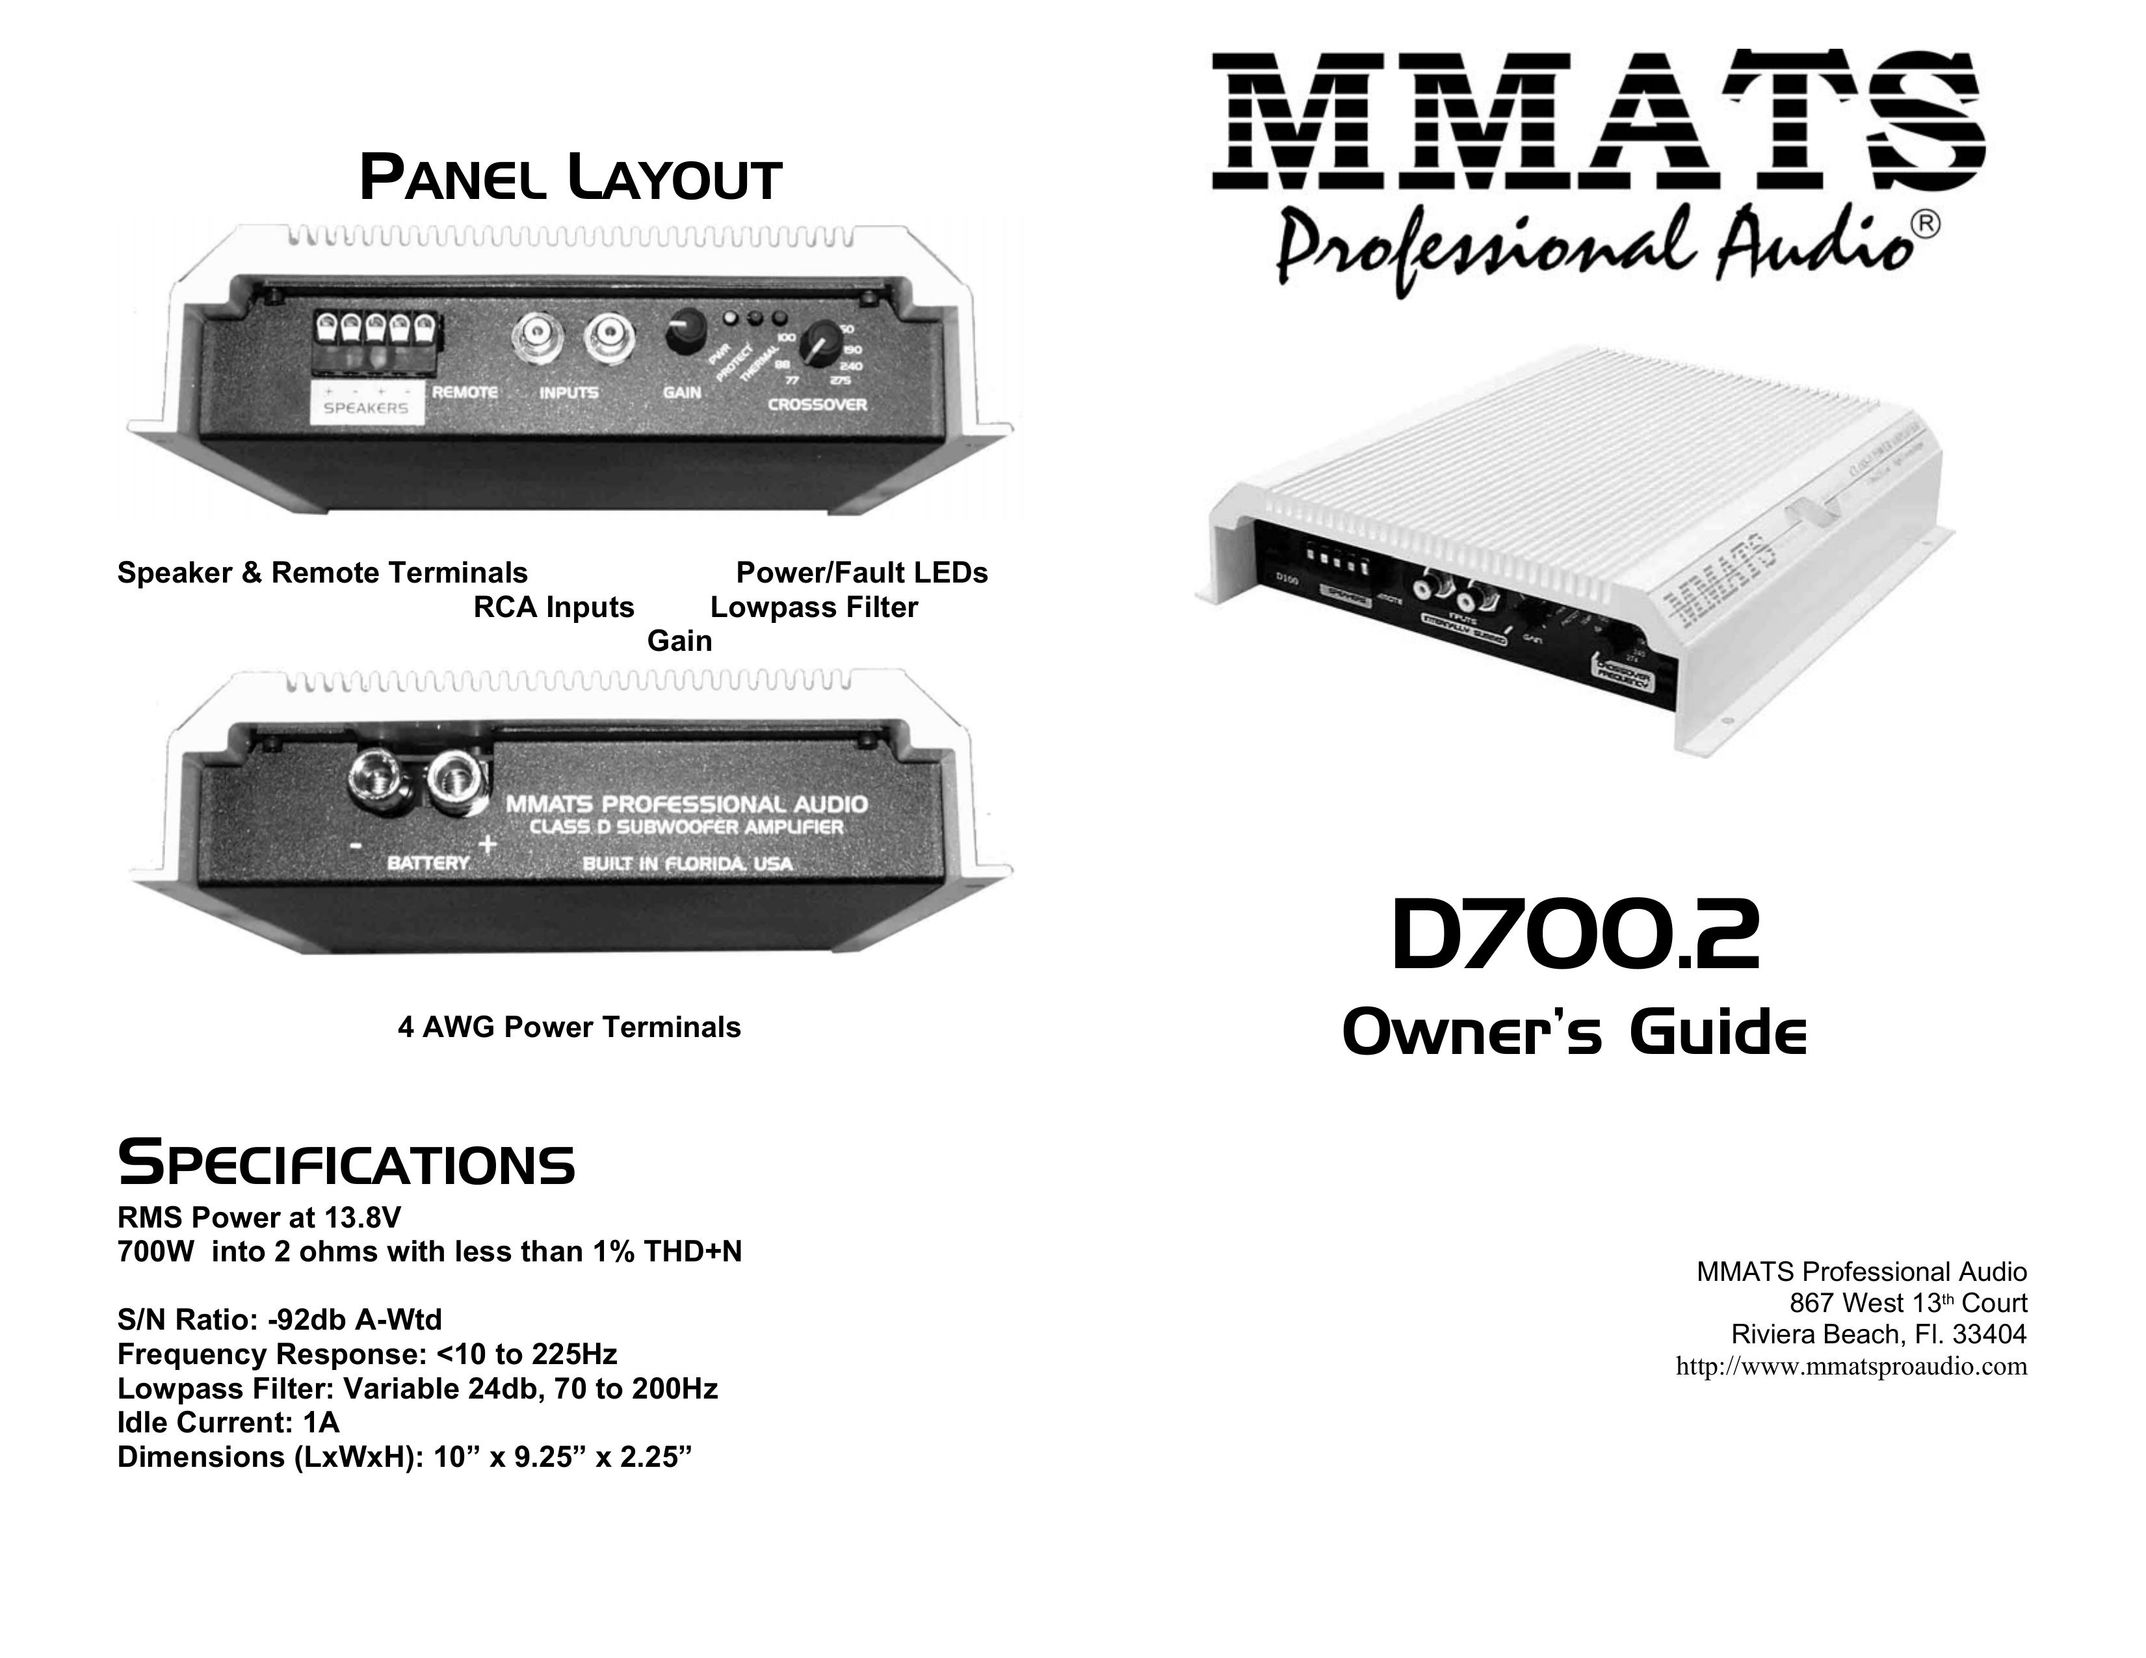 MMATS Professional Audio D700.2 Stereo Amplifier User Manual